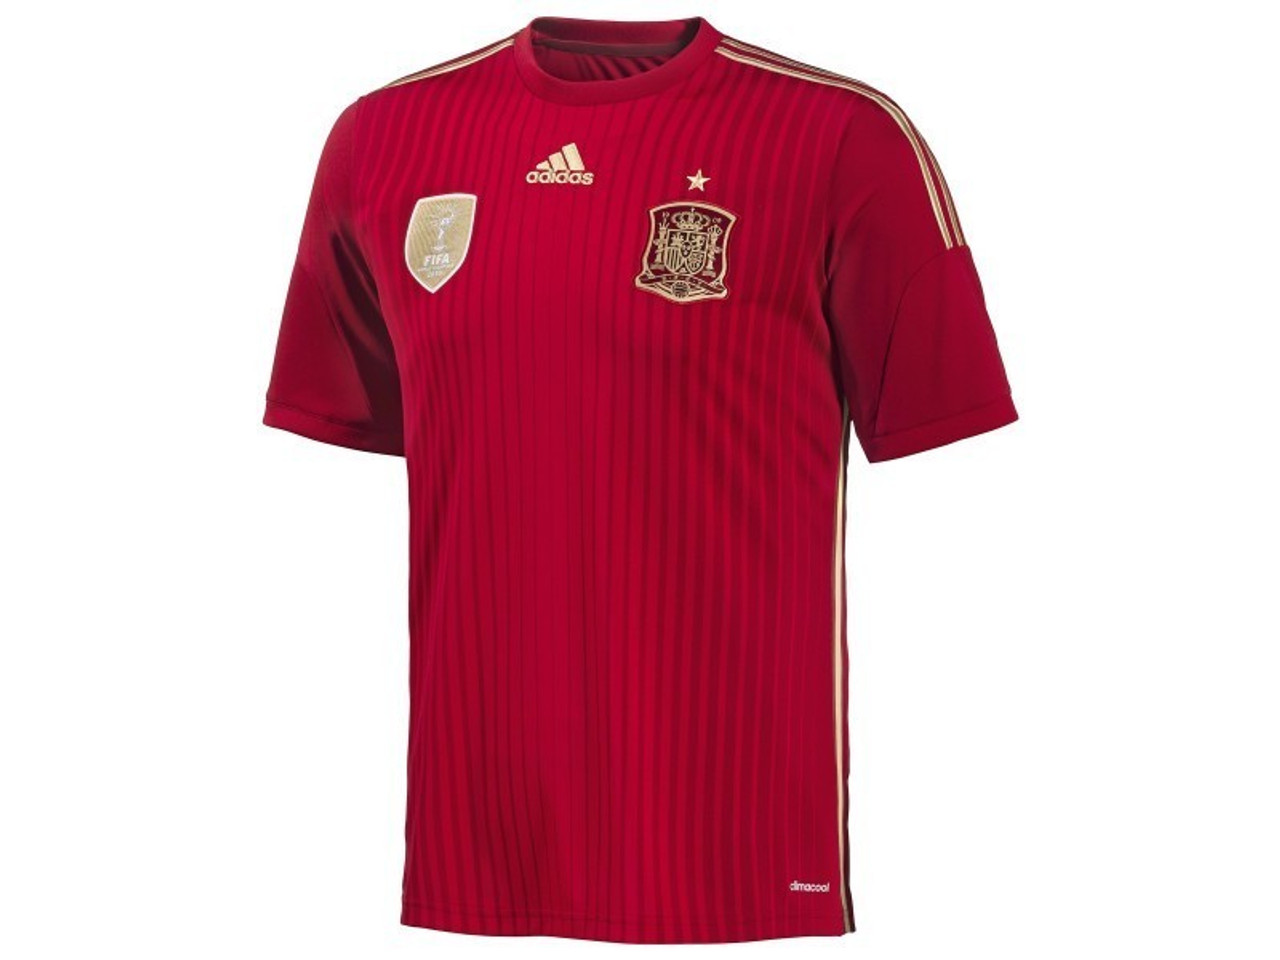  adidas Spain Home Authentic Soccer Jersey World Cup 2014  (Small) : Sports Fan Jerseys : Sports & Outdoors